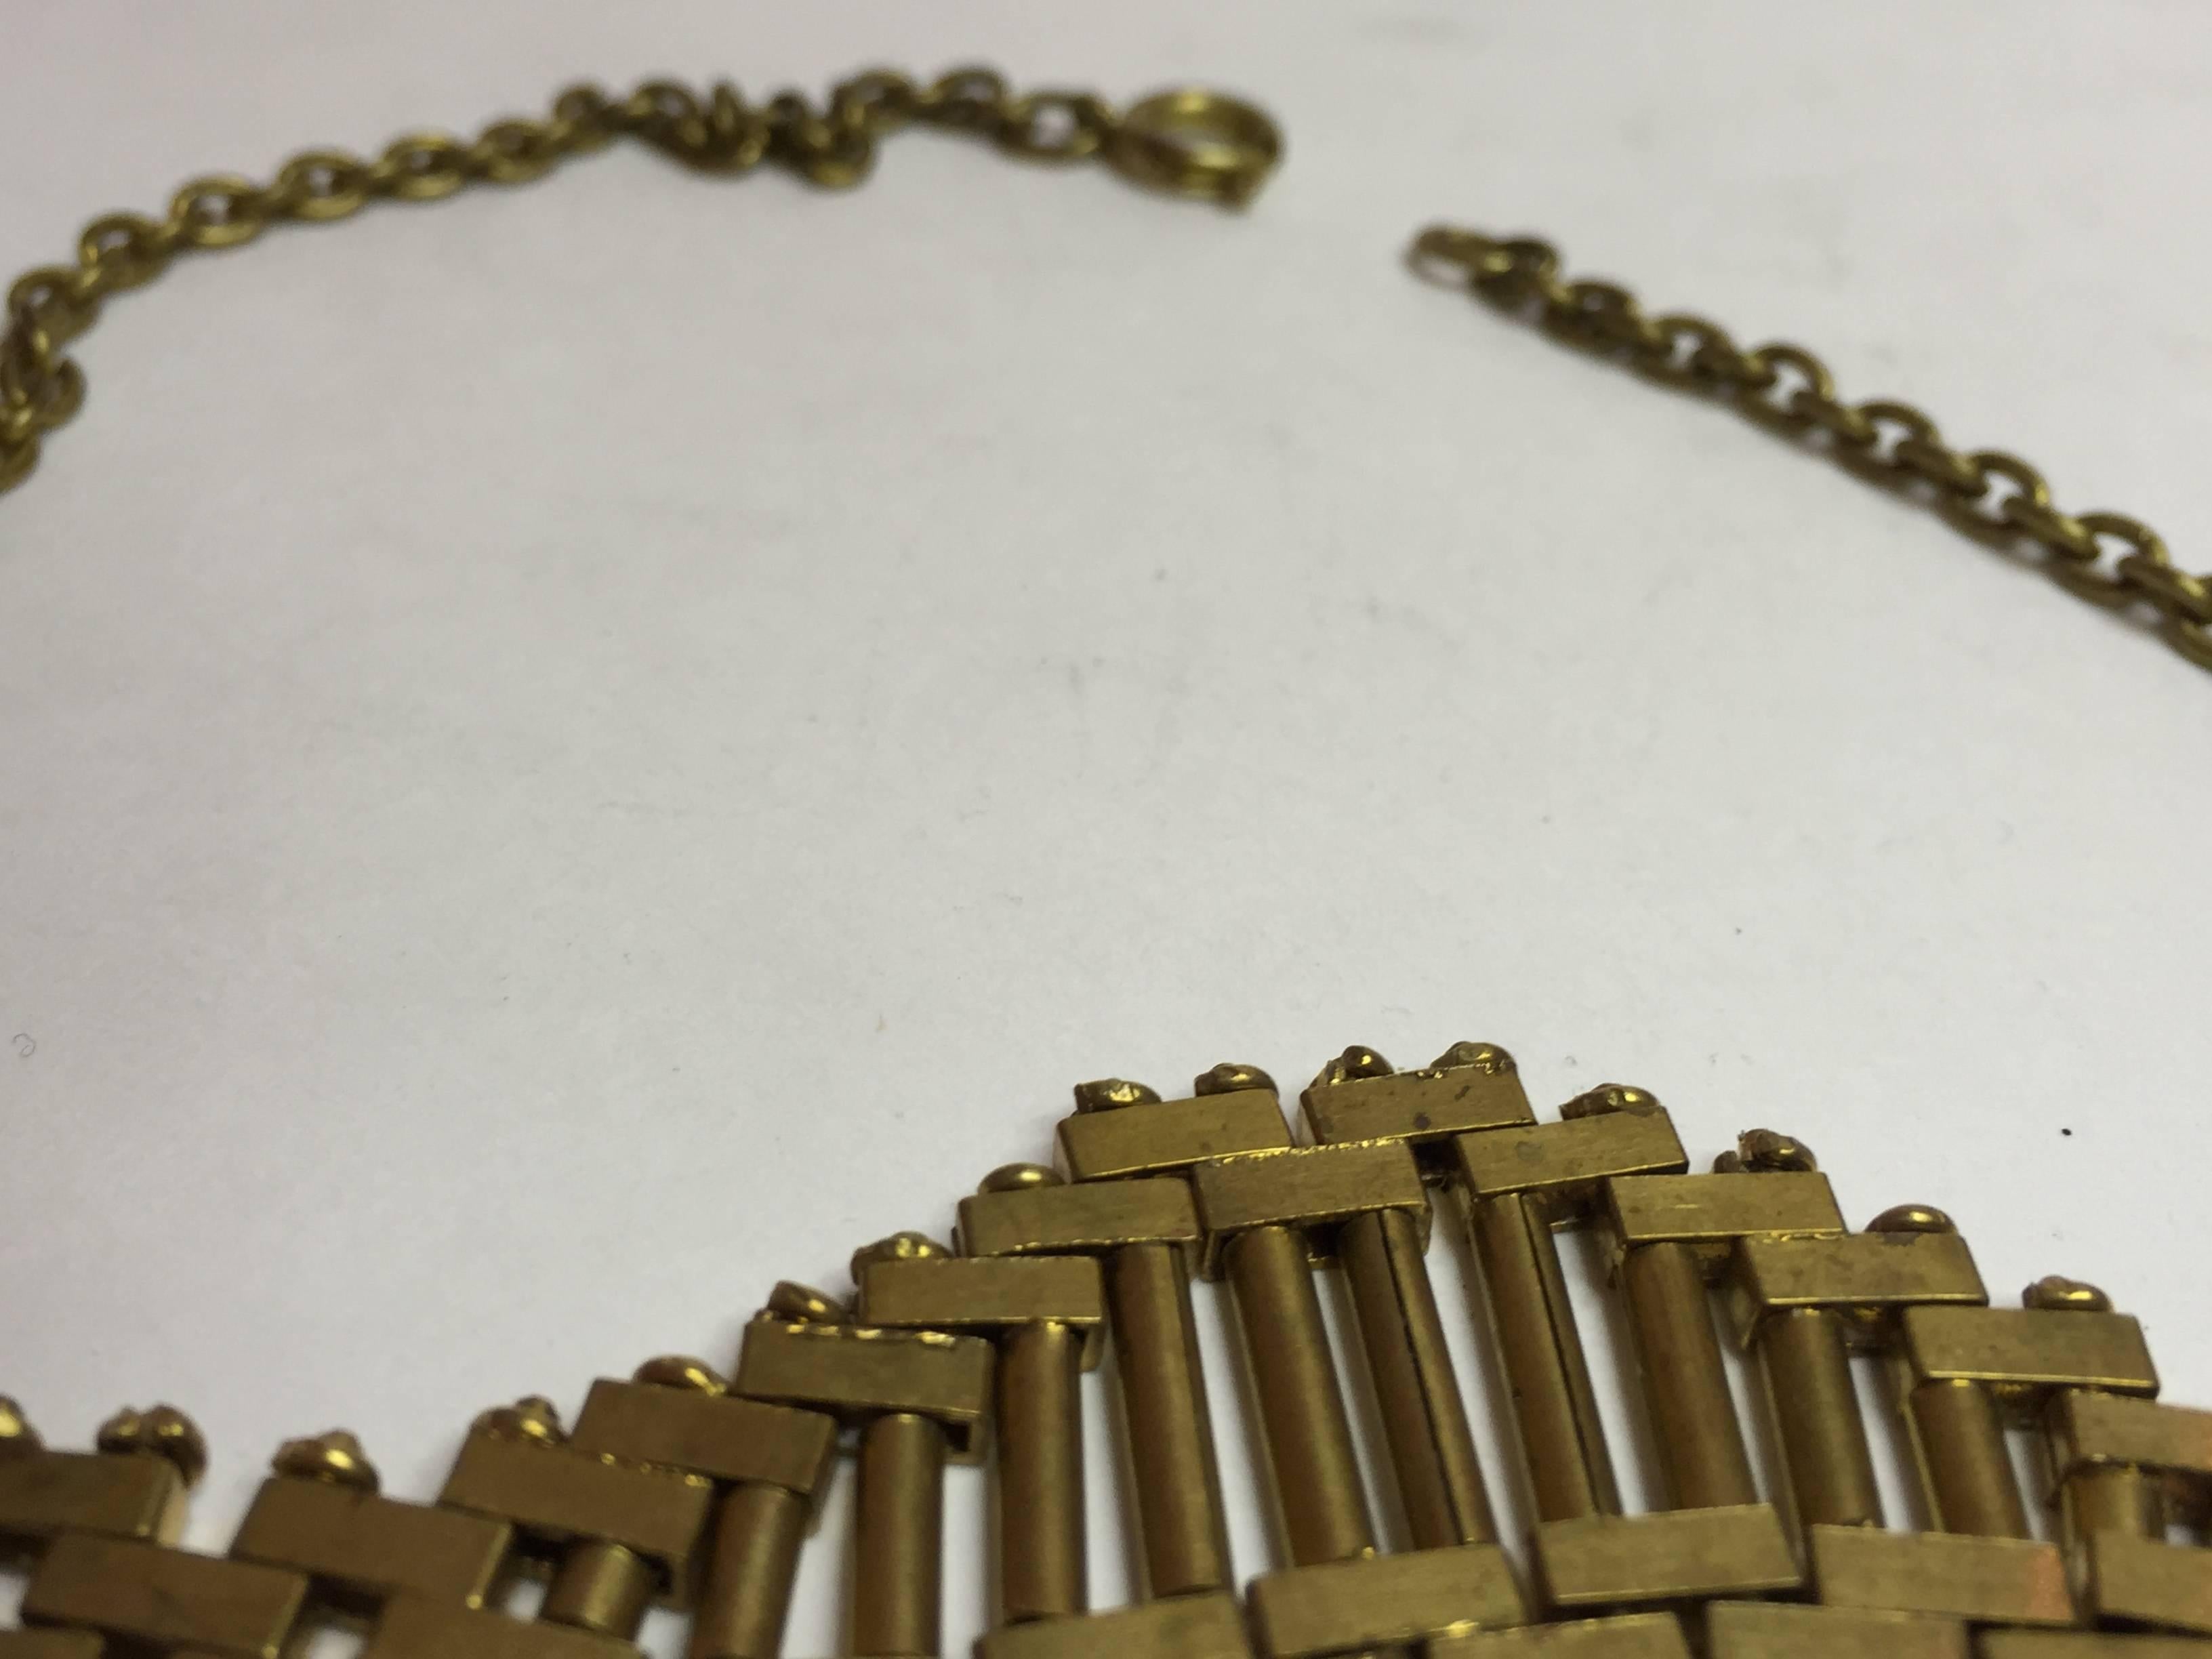 This German Art deco goldtone metal 1930s machine age necklace by Jacob Bengel is archetypal chainwork he is well known for. The central machine age articulated section is 4